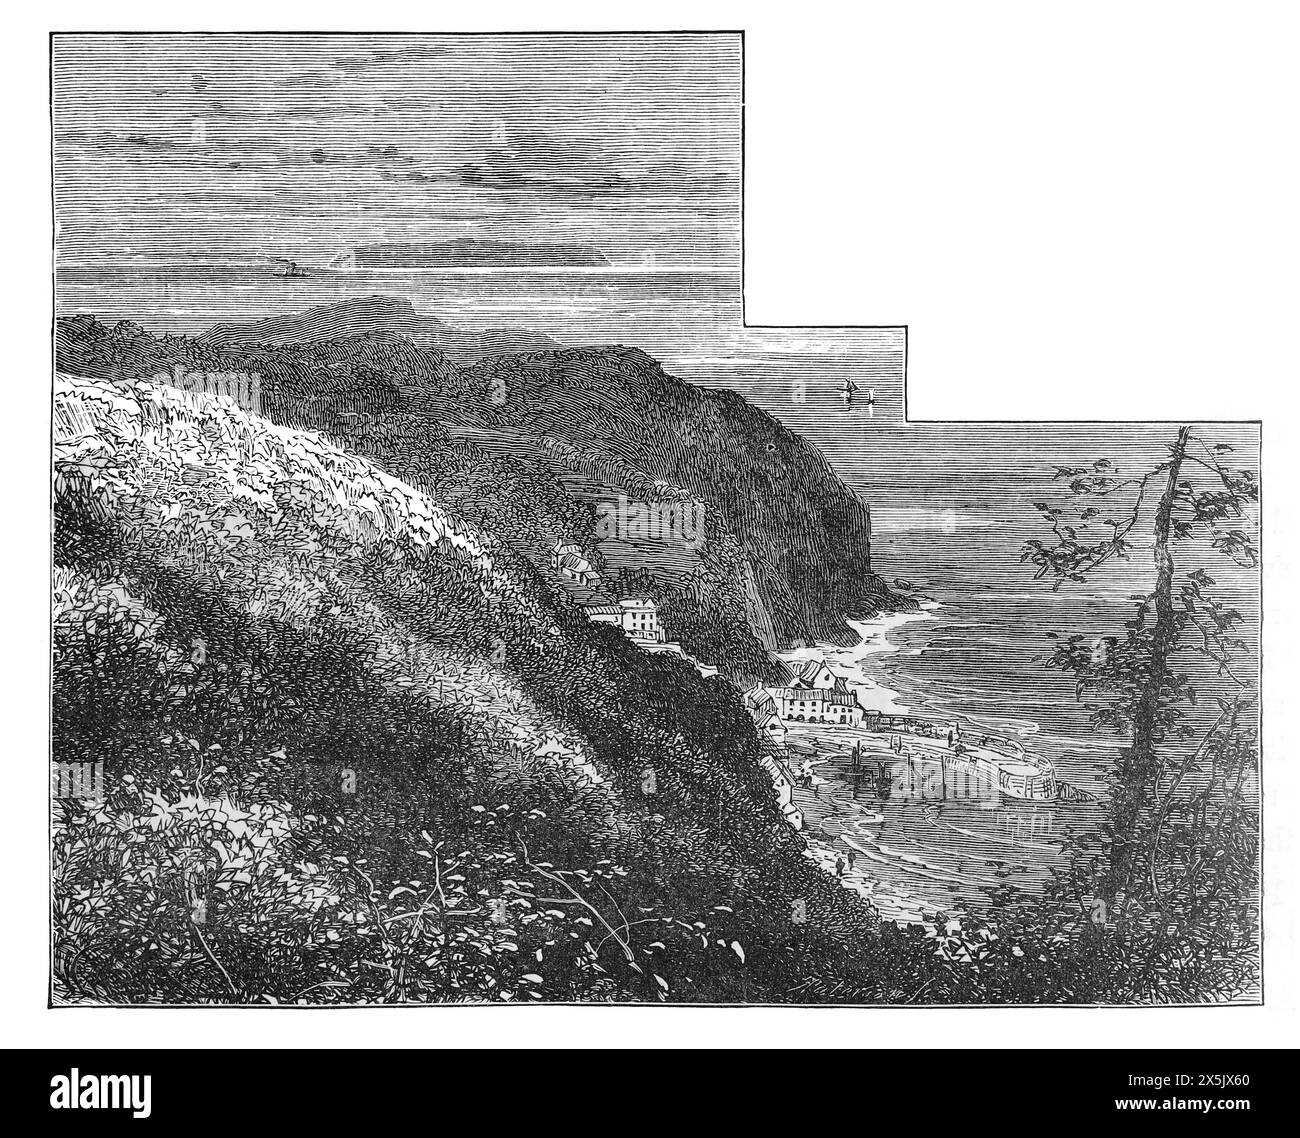 Clovelly, North Devon, viewed from The Hobby Drive. As it appeared in the late 19th century. Black and White Illustration from Our Own Country Vol III published by Cassell, Petter, Galpin & Co. in the late 19th century. Stock Photo